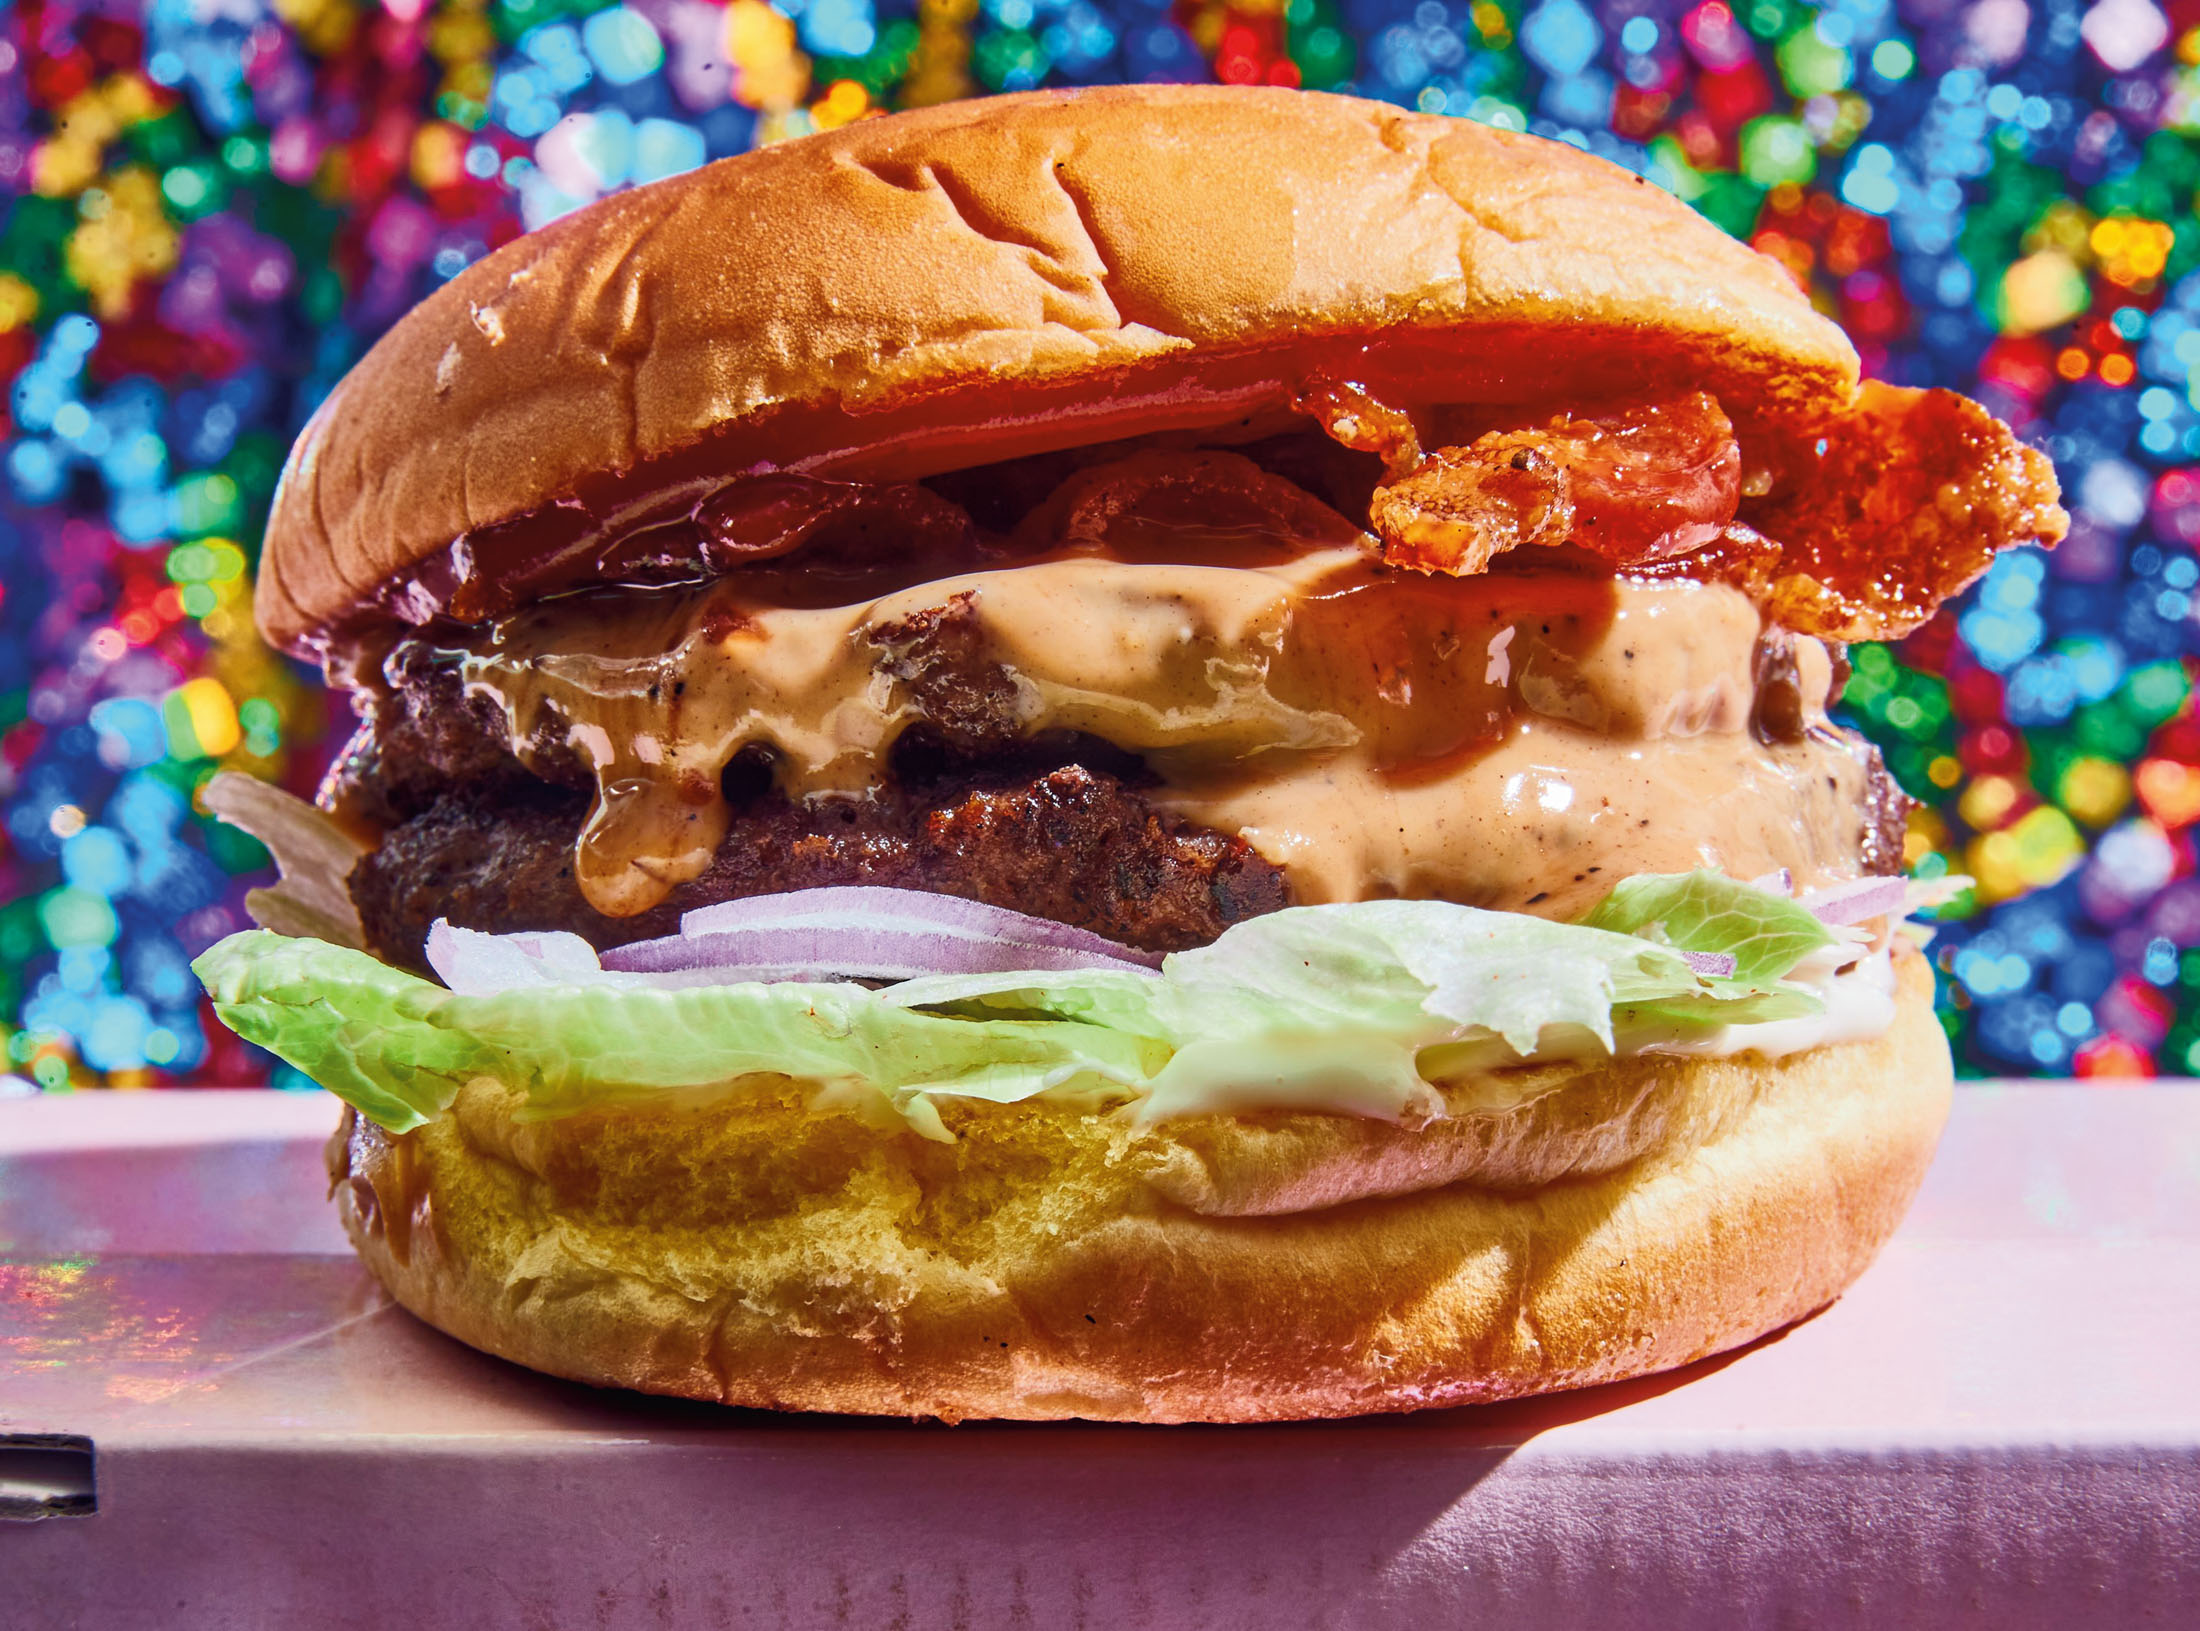 Pursuits Weekly: Peanut Butter Bacon Burgers Are Pure Comfort